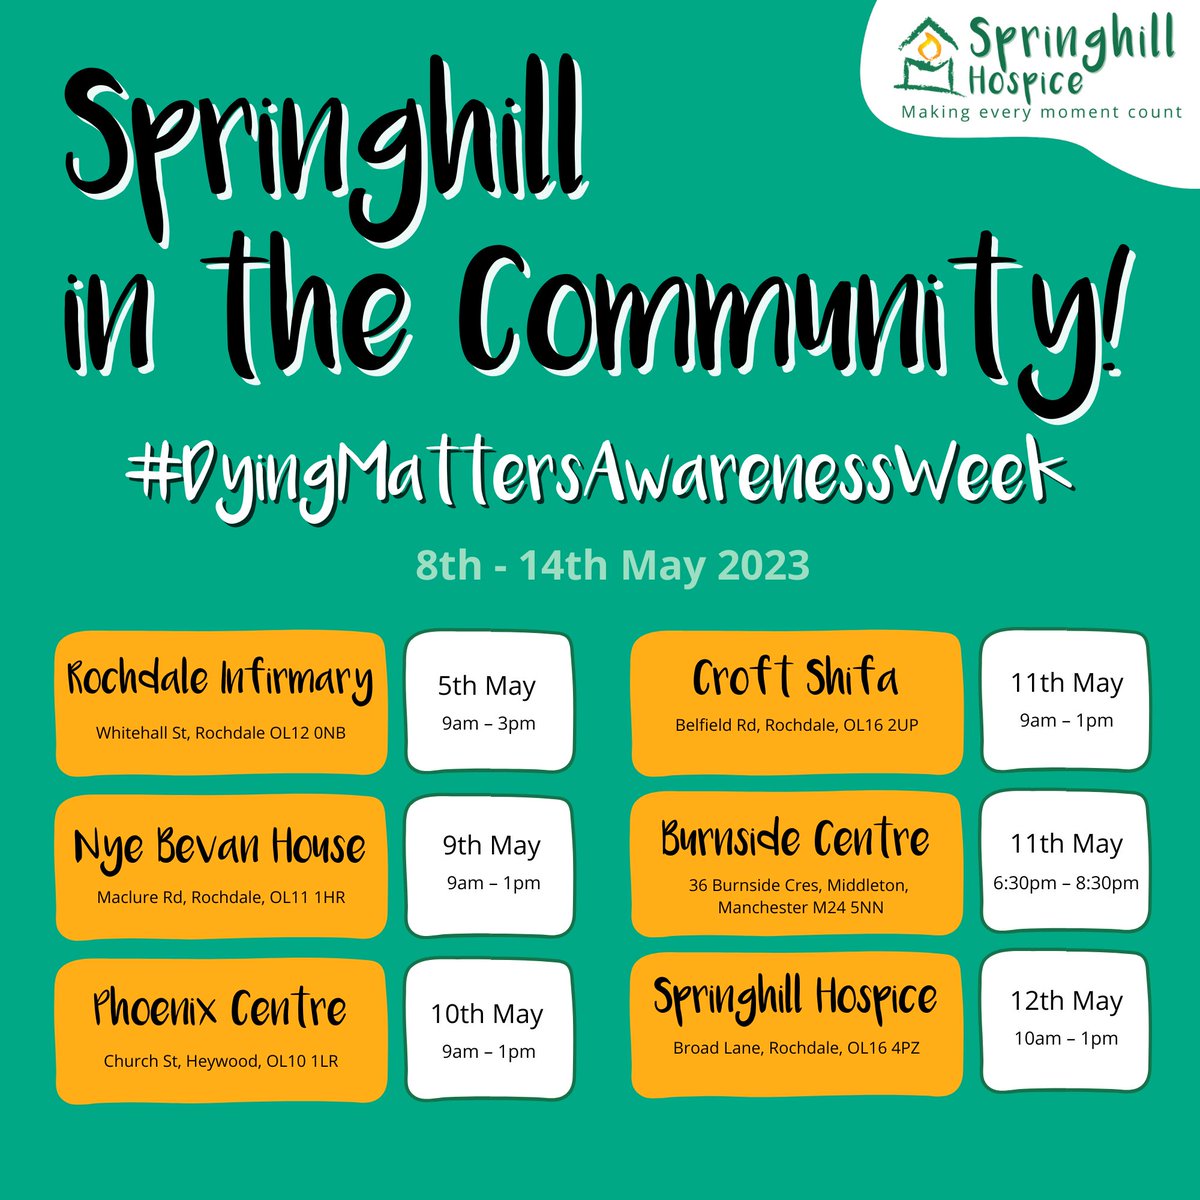 Springhill Hospice will be going out into the community of Rochdale during #DyingMattersAwarenessWeek, to help tackle the stigma and open up conversations about grief and death – If you need advice, someone to talk to, or just want to learn more, come and join us! 💚